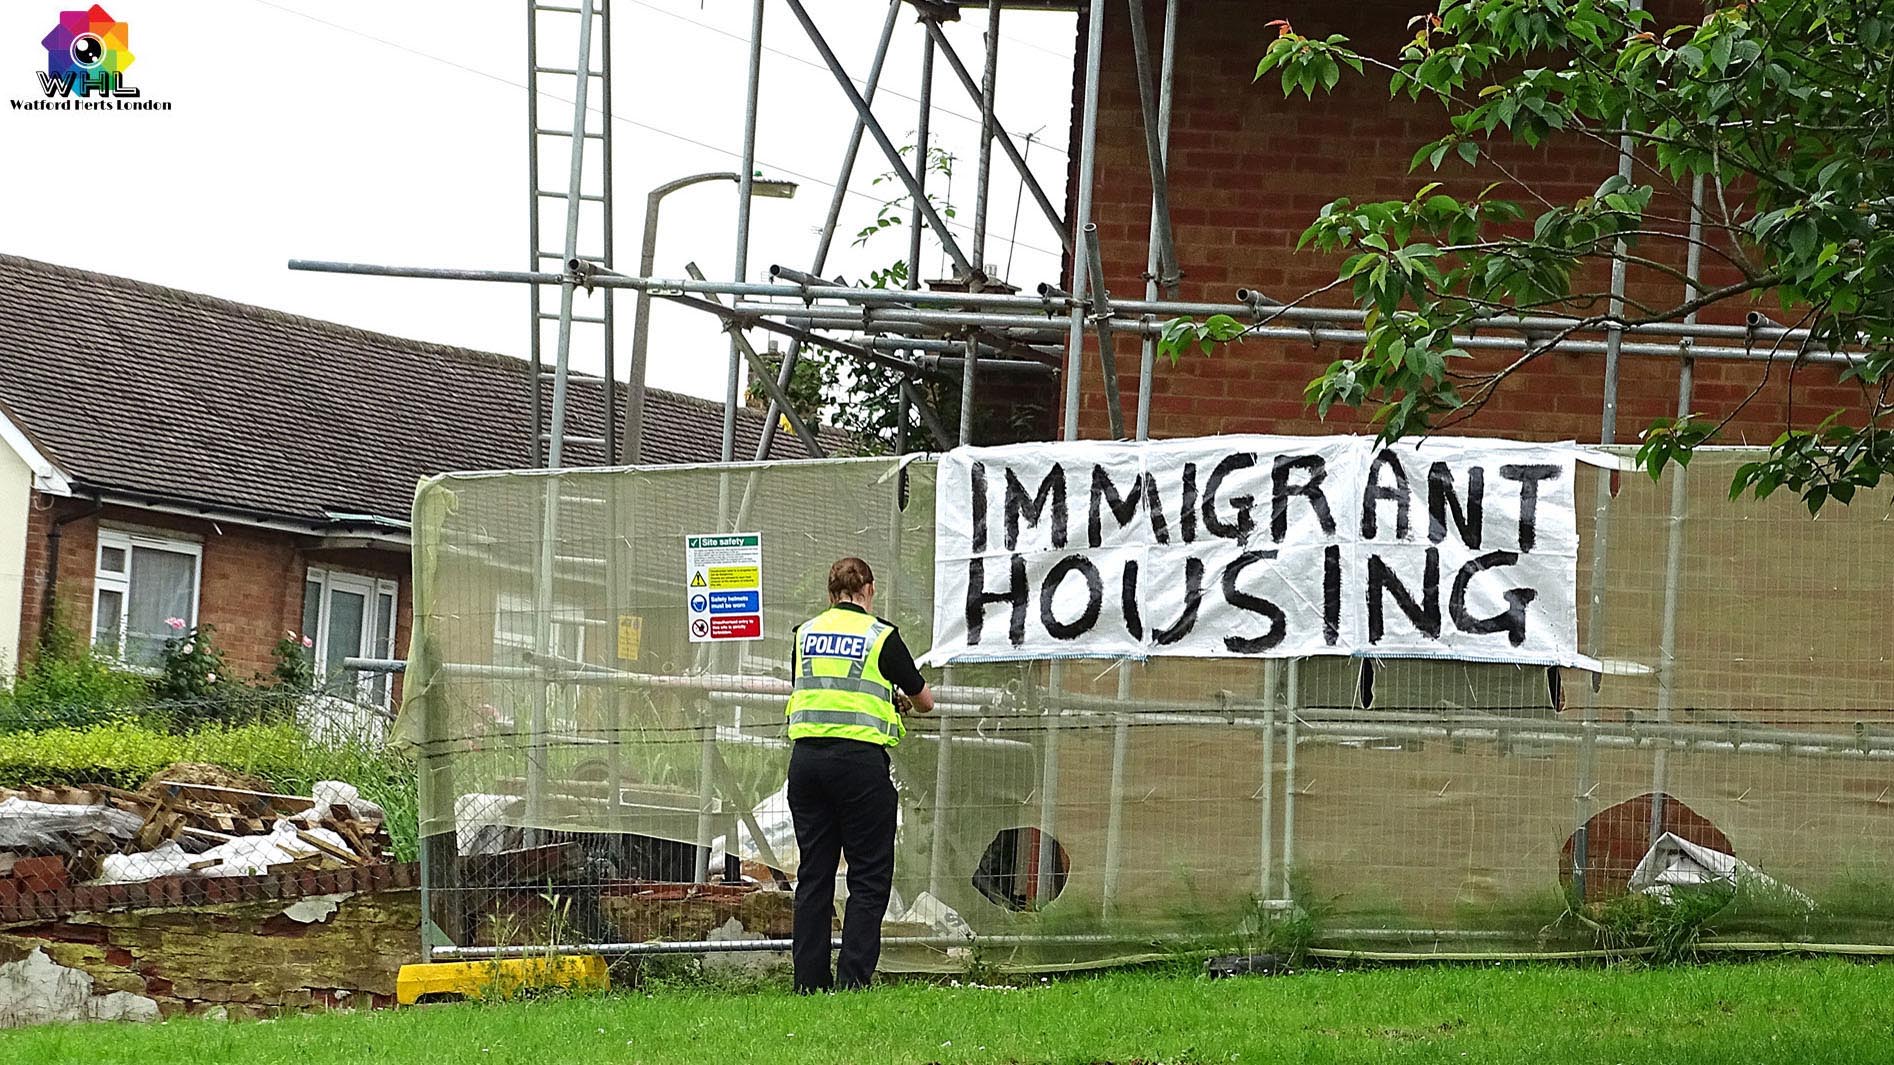 Police Remove Immigrant Housing Graffiti Banner on House in Meriden Watford 2016